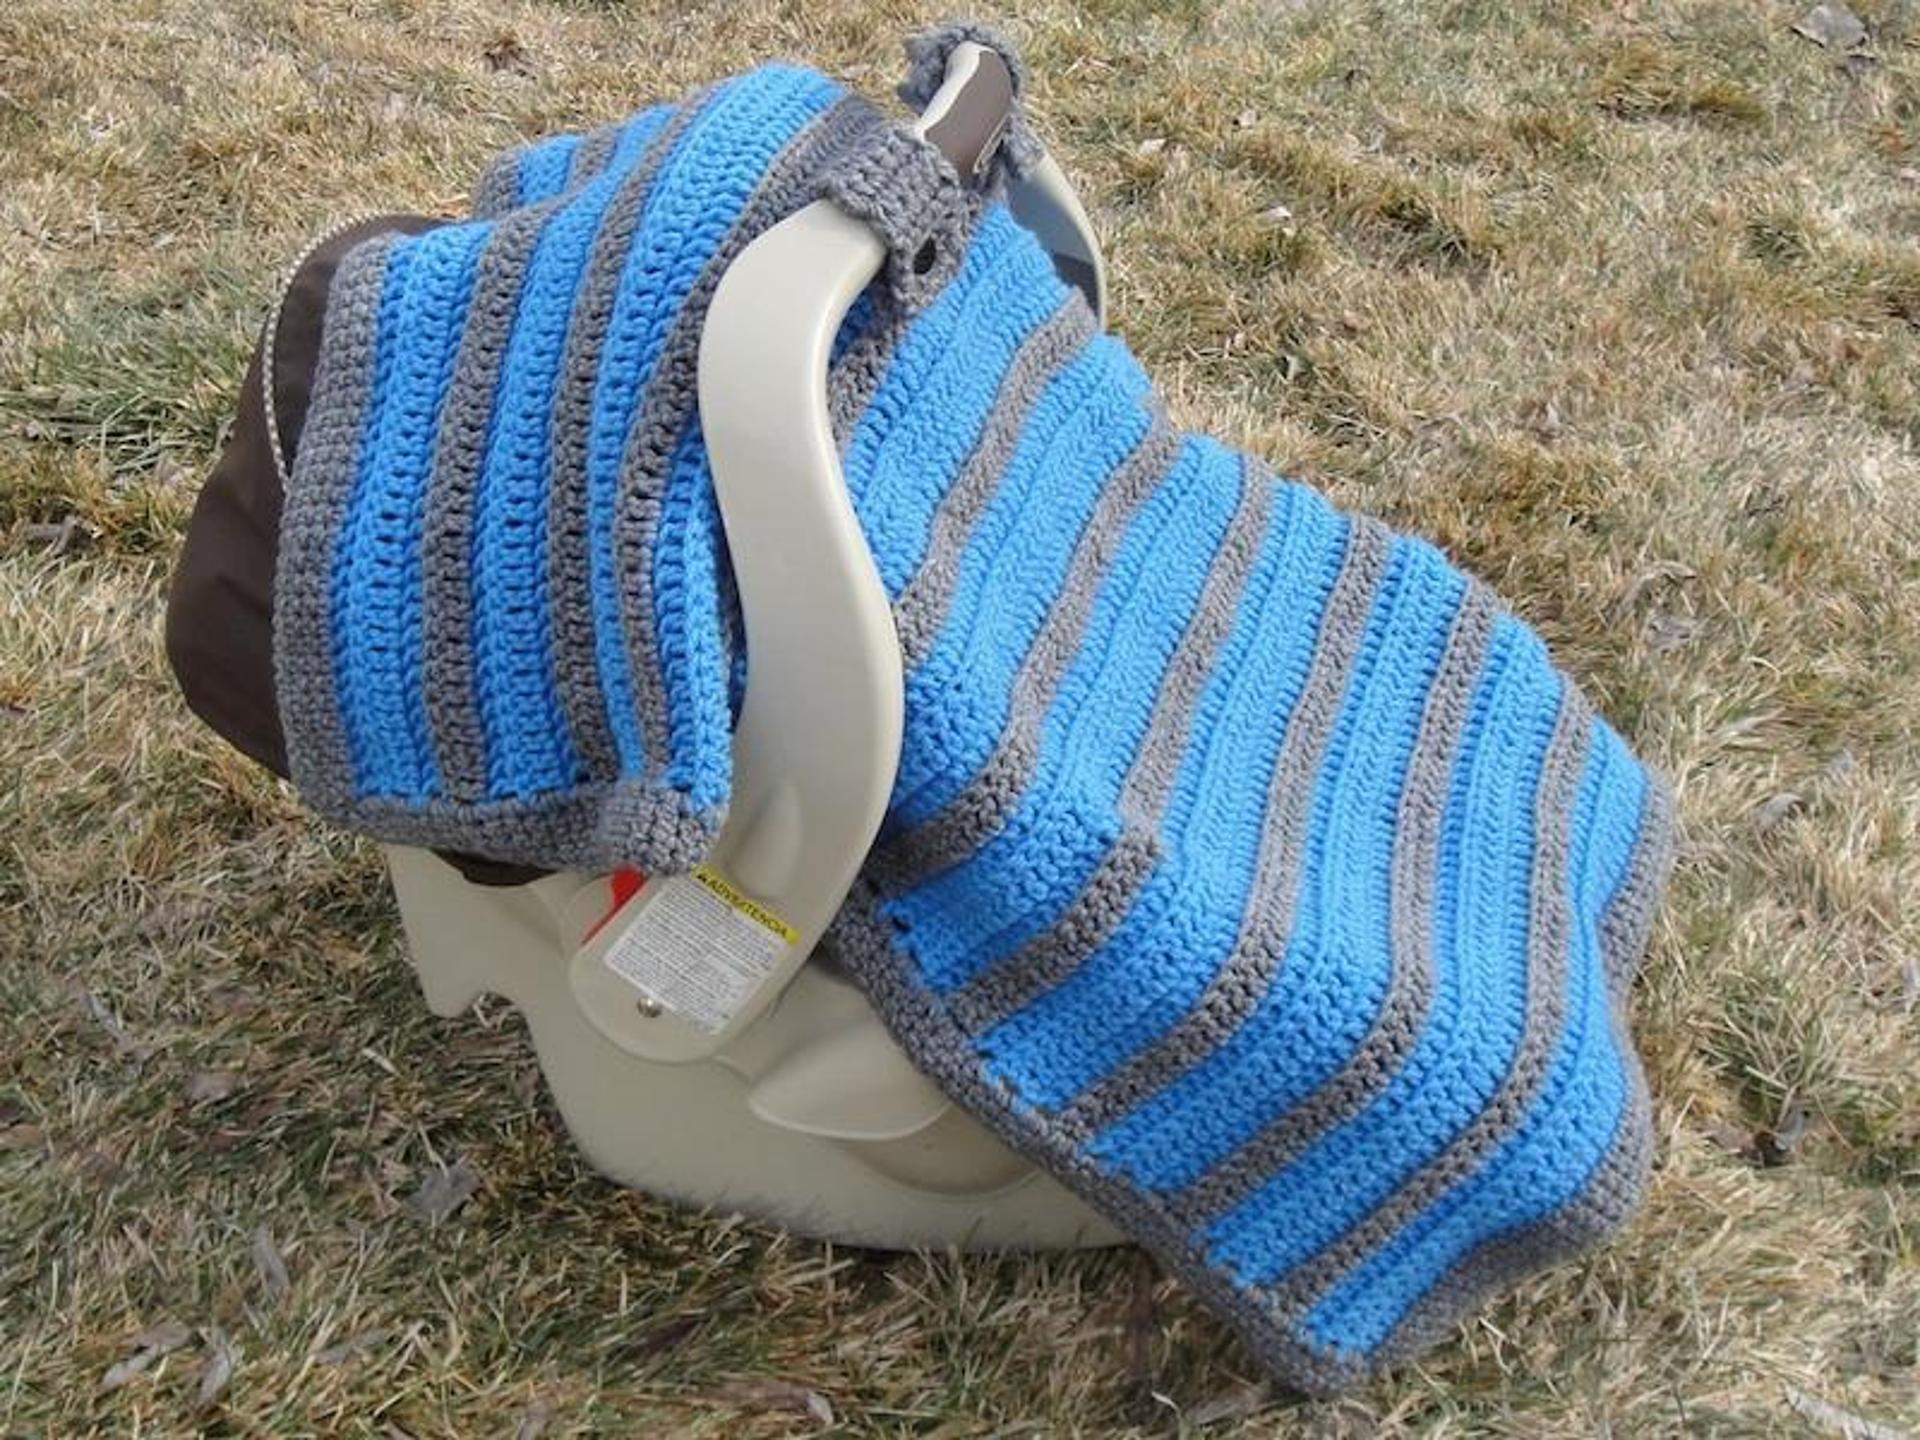 Car Seat Knitted Blanket Pattern 9 Crochet Carseat Canopy Patterns For Babies